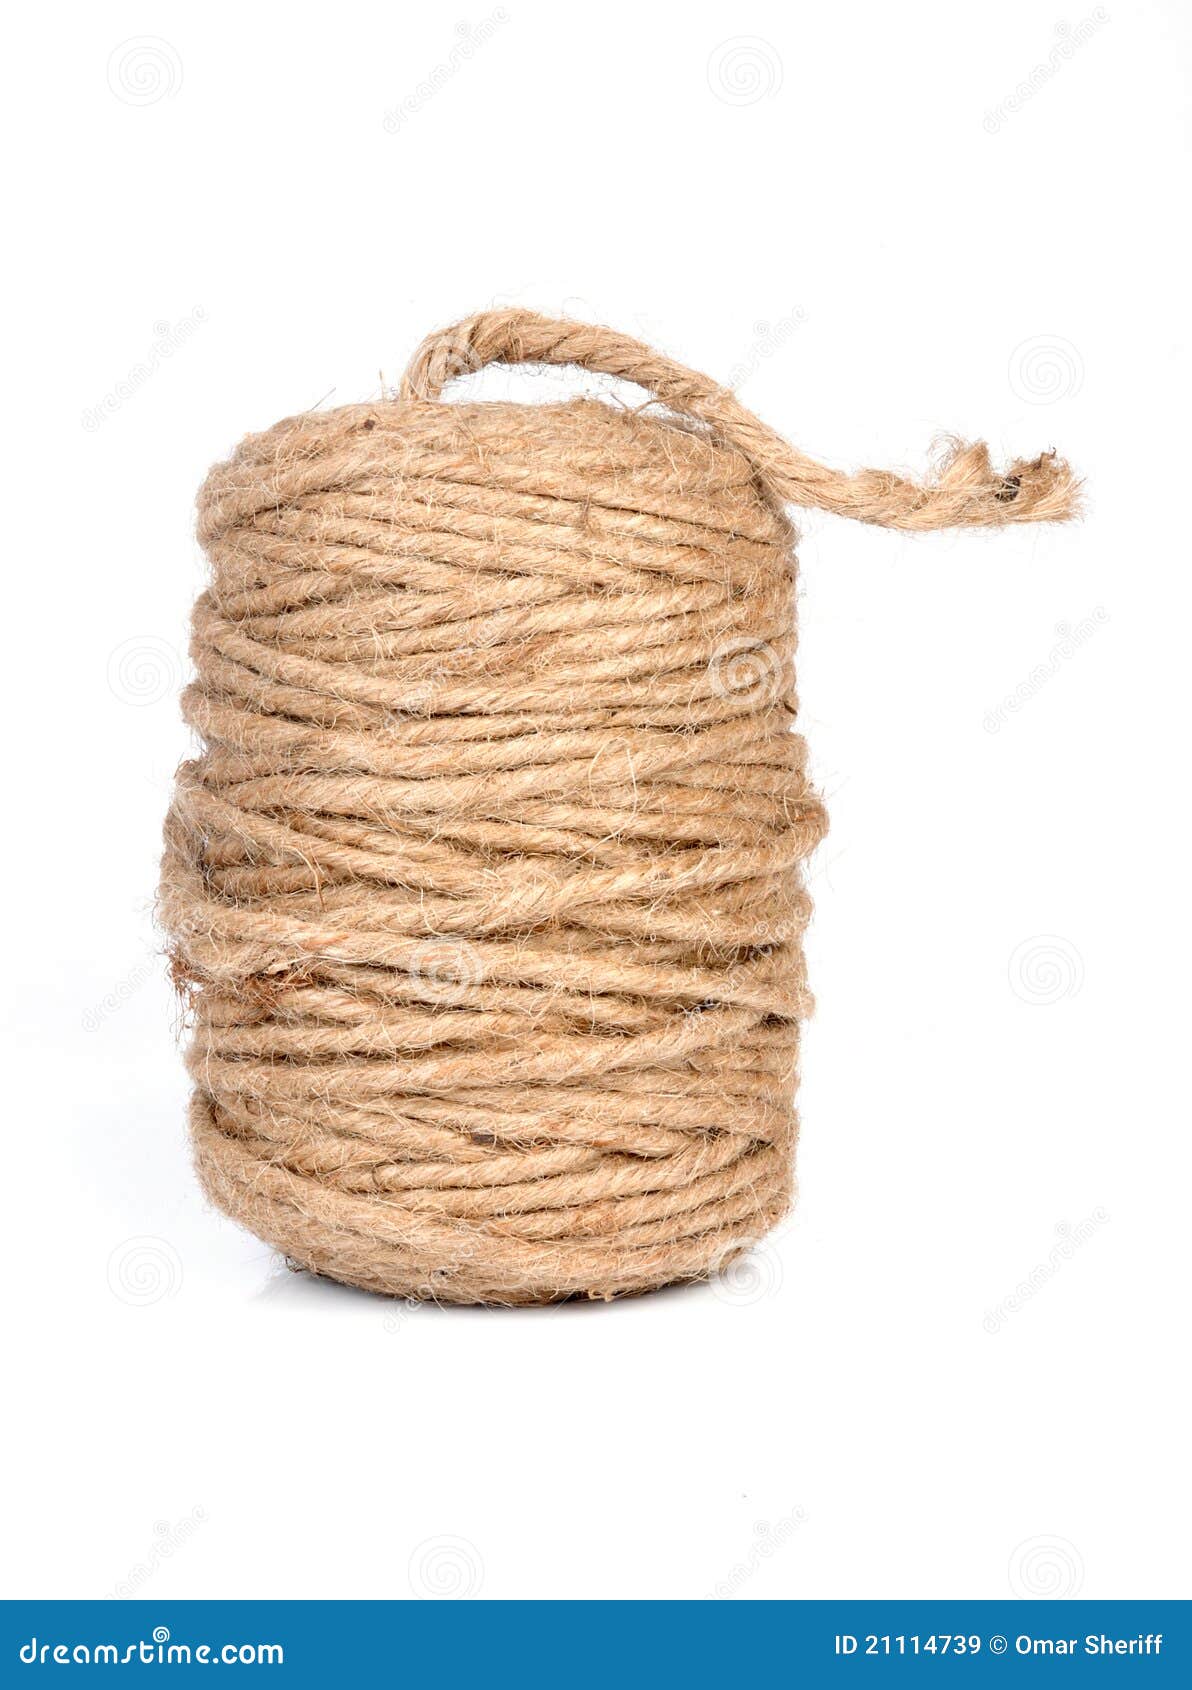 Thick string roll stock image. Image of rolled, twine - 21114739